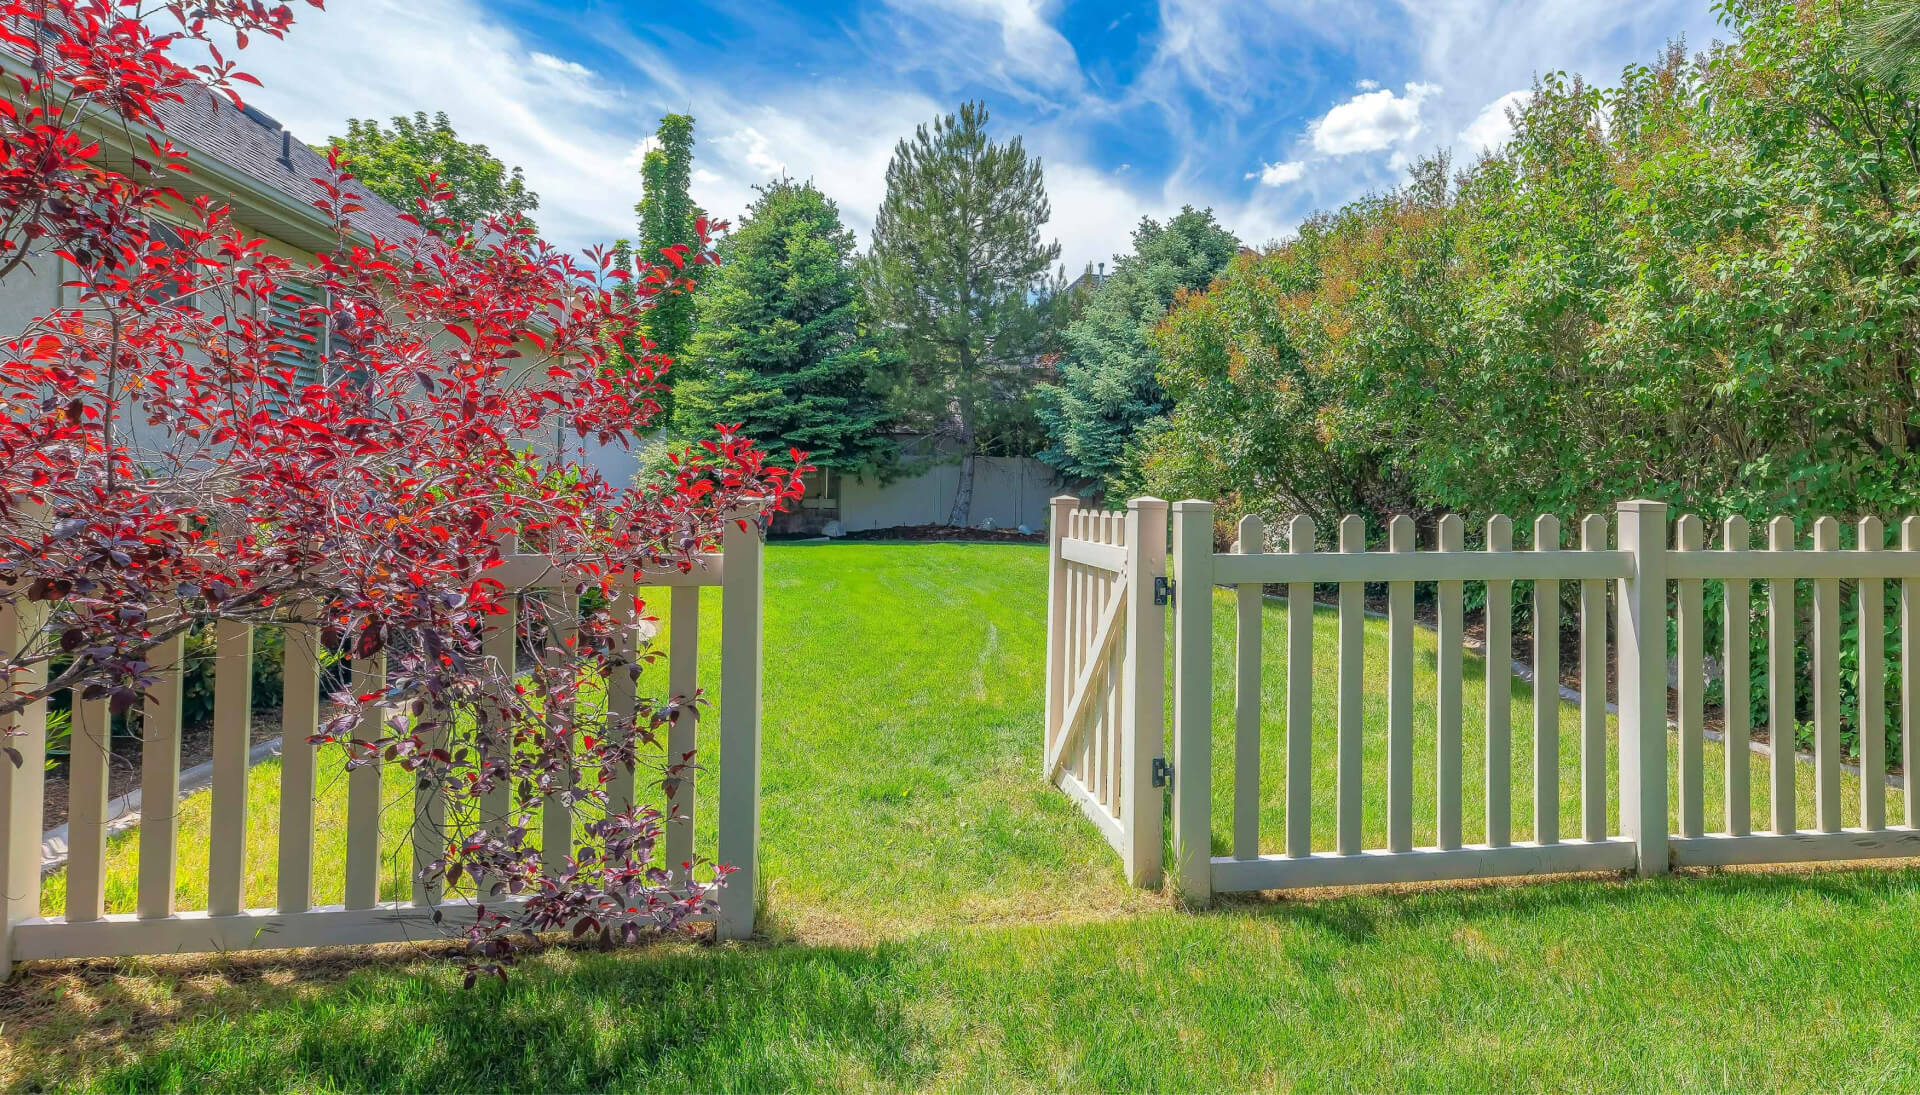 A functional fence gate providing access to a well-maintained backyard, surrounded by a wooden fence in Denver